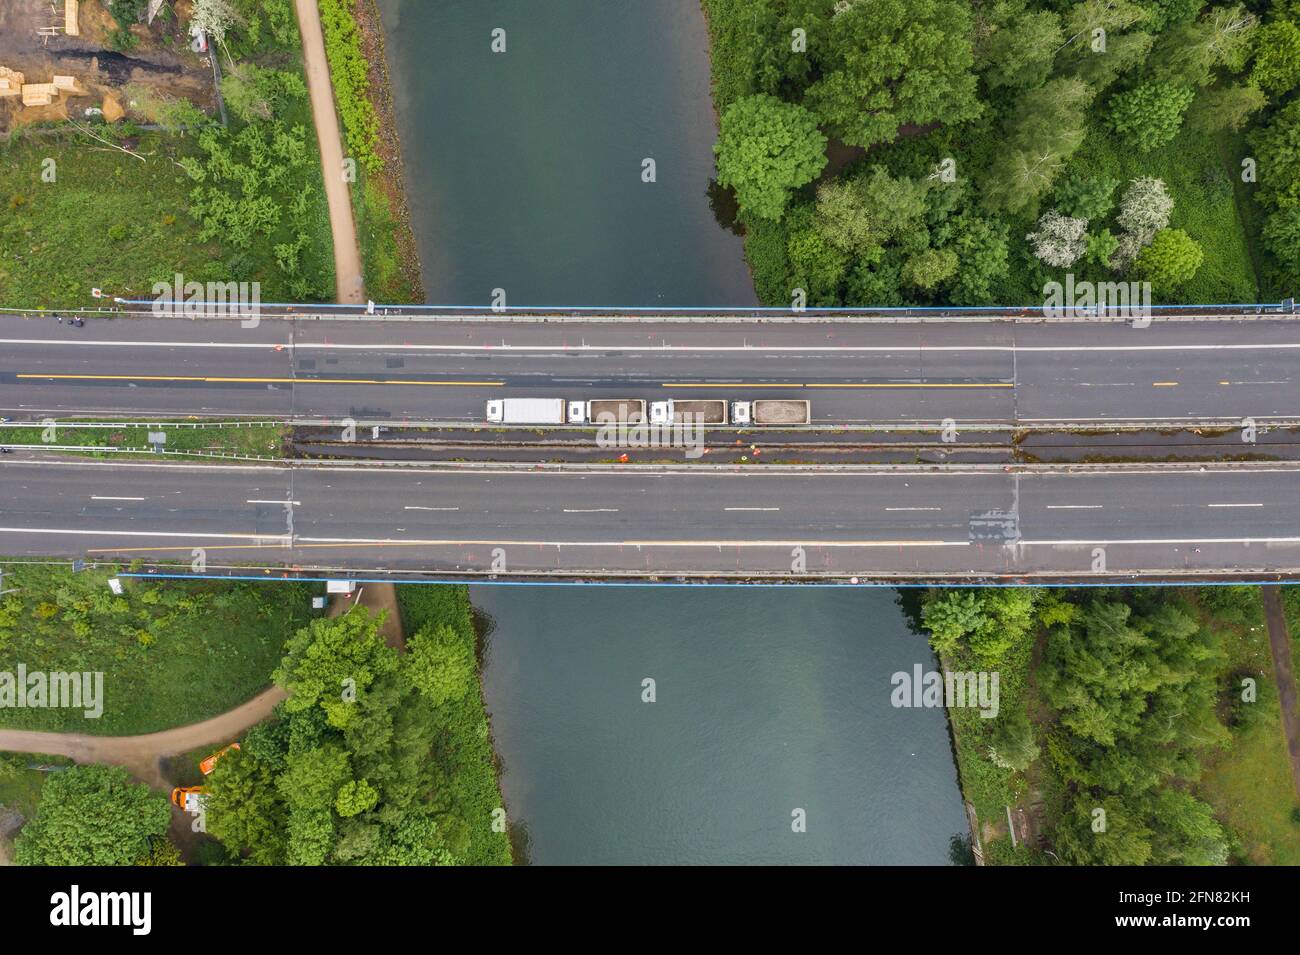 Herne, Germany. 15th May, 2021. Trucks park on the damaged A43 Emschertal Bridge during a load test (aerial photo with drone). Because the steel girders of the bridge over the Rhine-Herne Canal have buckled due to excessive loads in recent years, the bridge is already closed to trucks weighing more than 3.5 tons. From Friday (14.5.) 10 p.m. to Monday (17.5.) 5 a.m. and from Friday (21.5.) 8 p.m. to Tuesday (25.5.) 5 a.m. the stretch between the Herne and Recklinghausen motorway junctions will be completely closed. Credit: Marcel Kusch/dpa/Alamy Live News Stock Photo